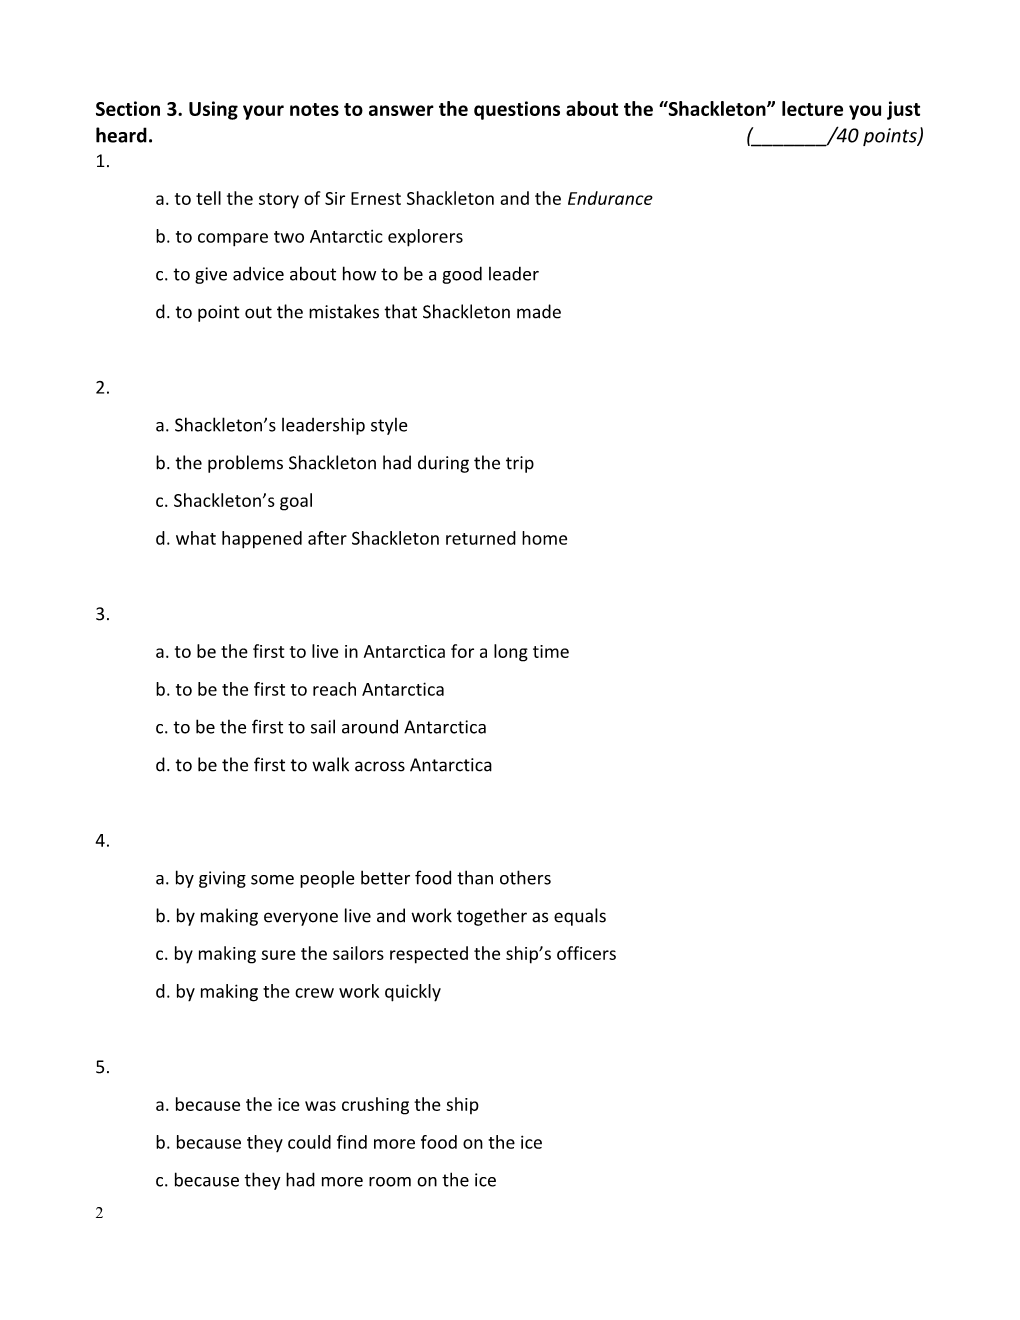 Section 1. Listen to an Excerpt from a Lecture on History. Complete the Notes. (_____/8Pts)